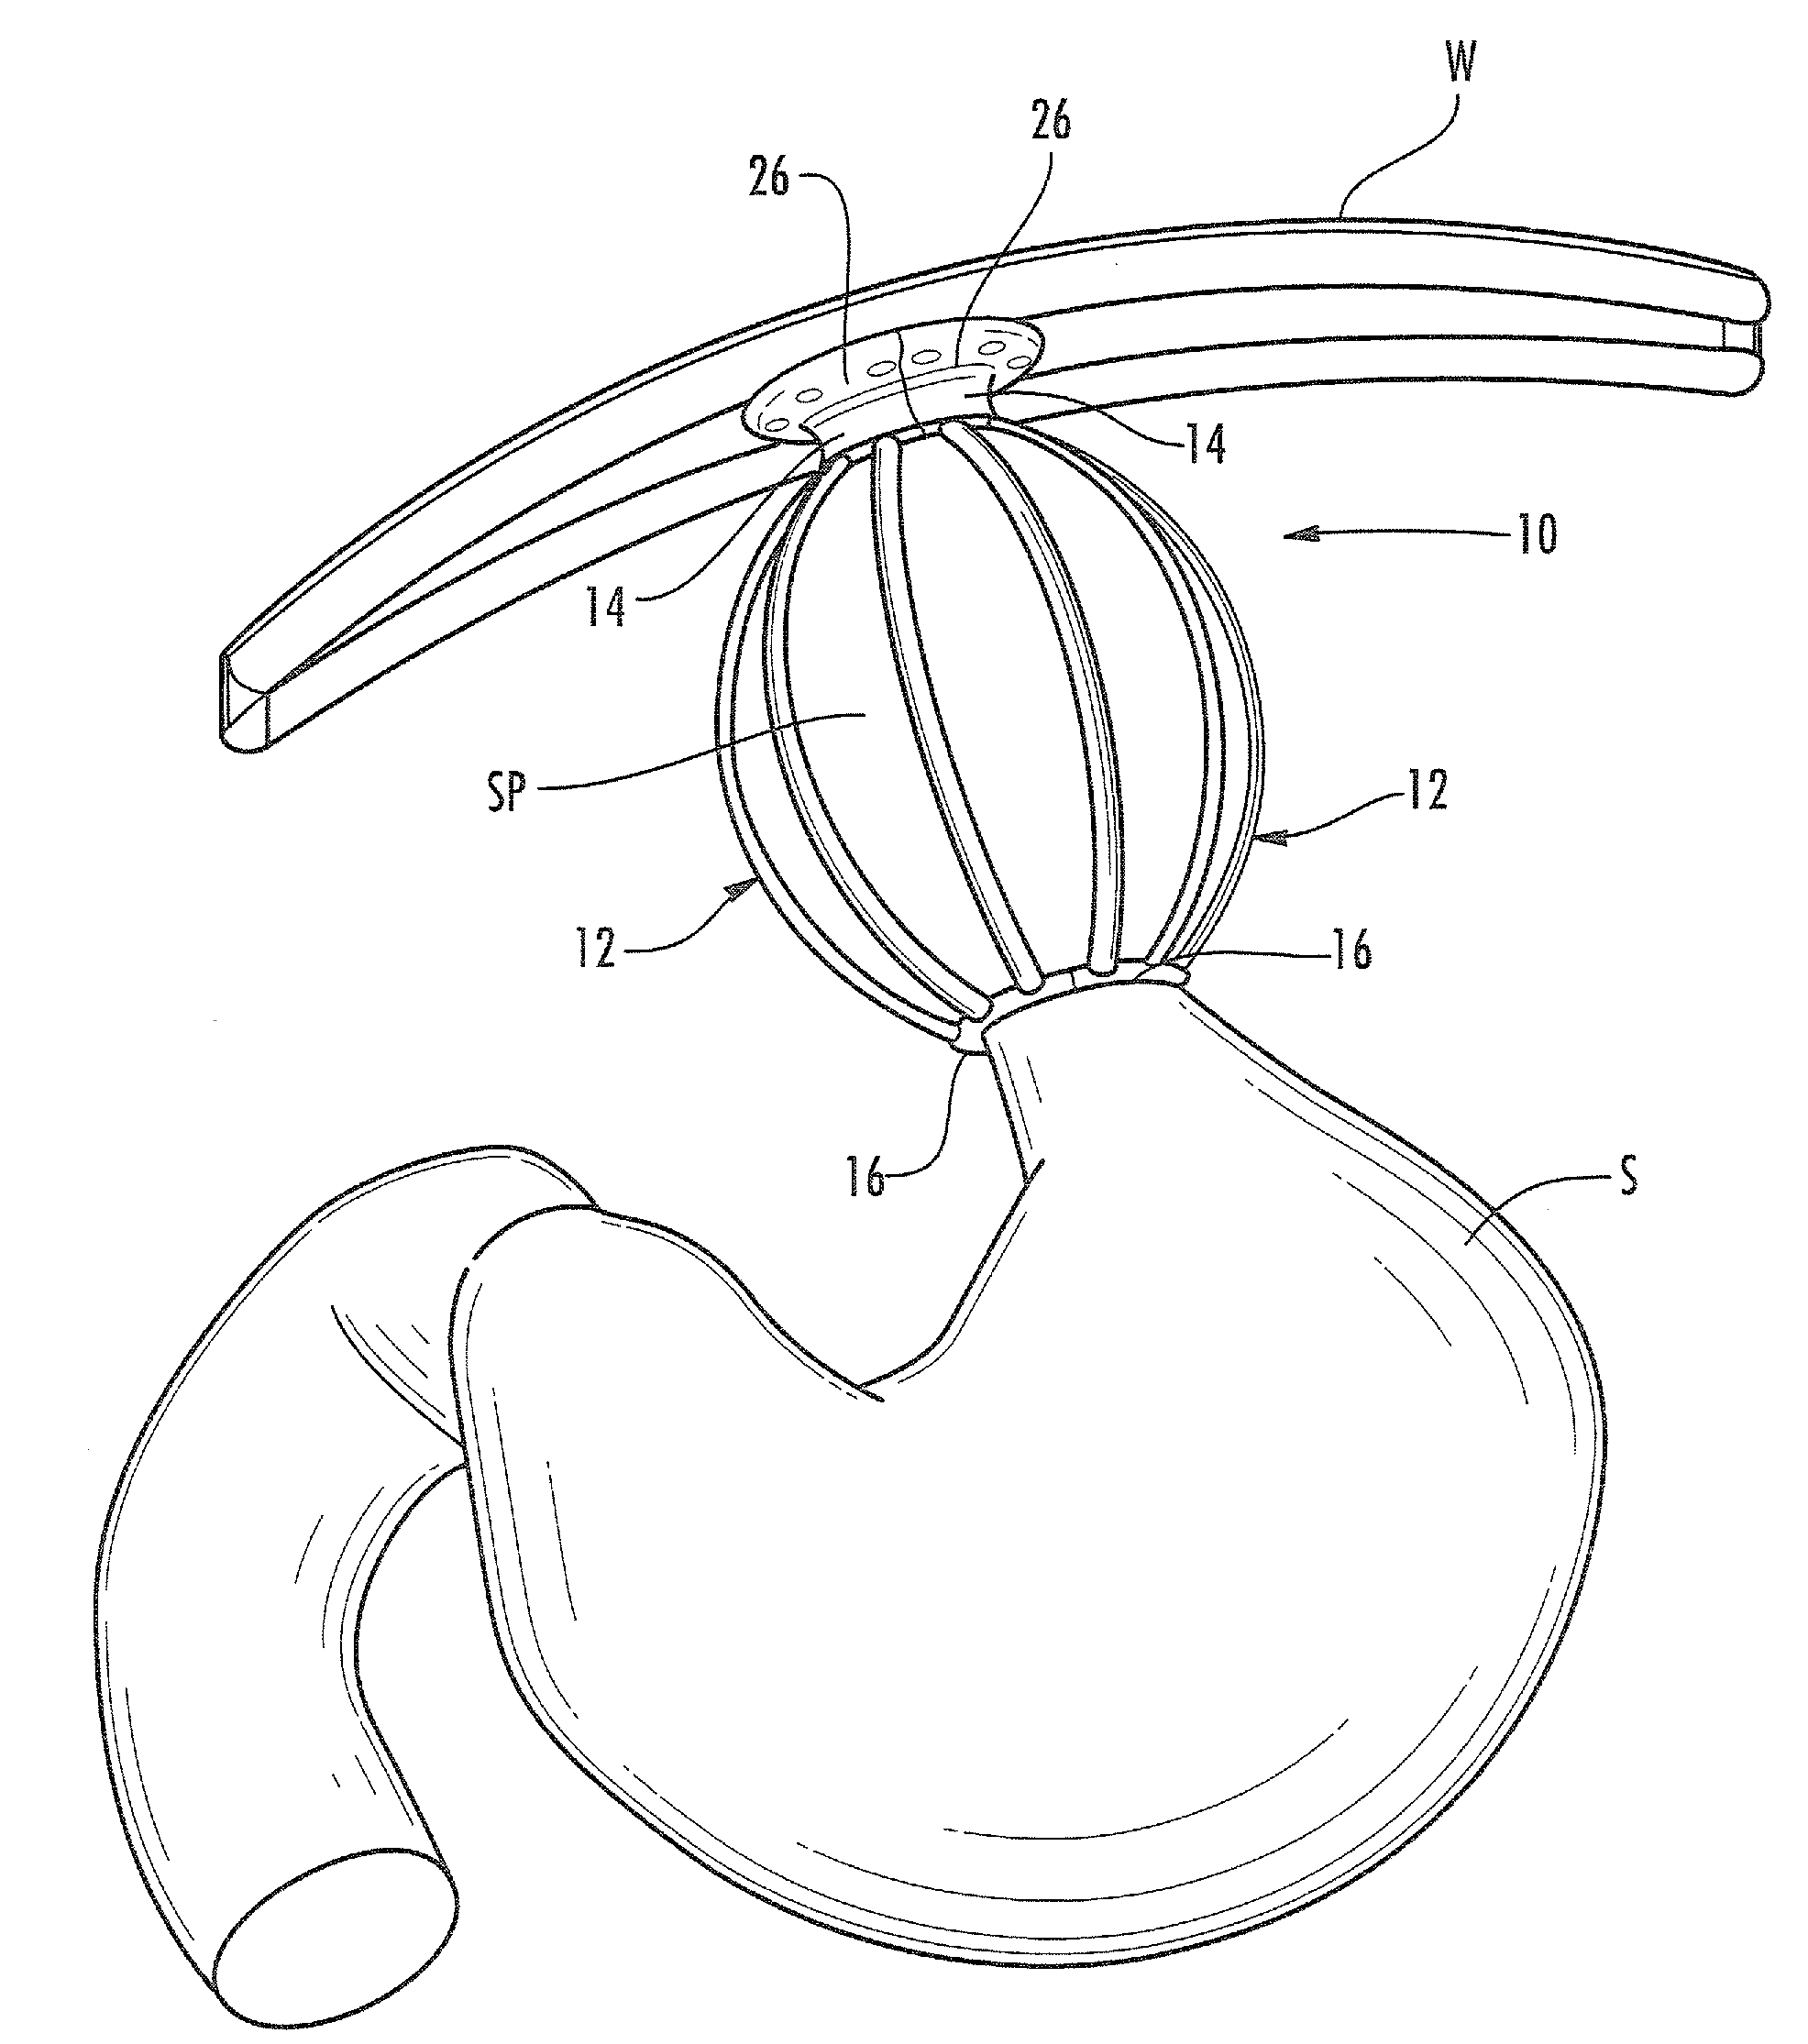 Satiation devices and methods for controlling obesity